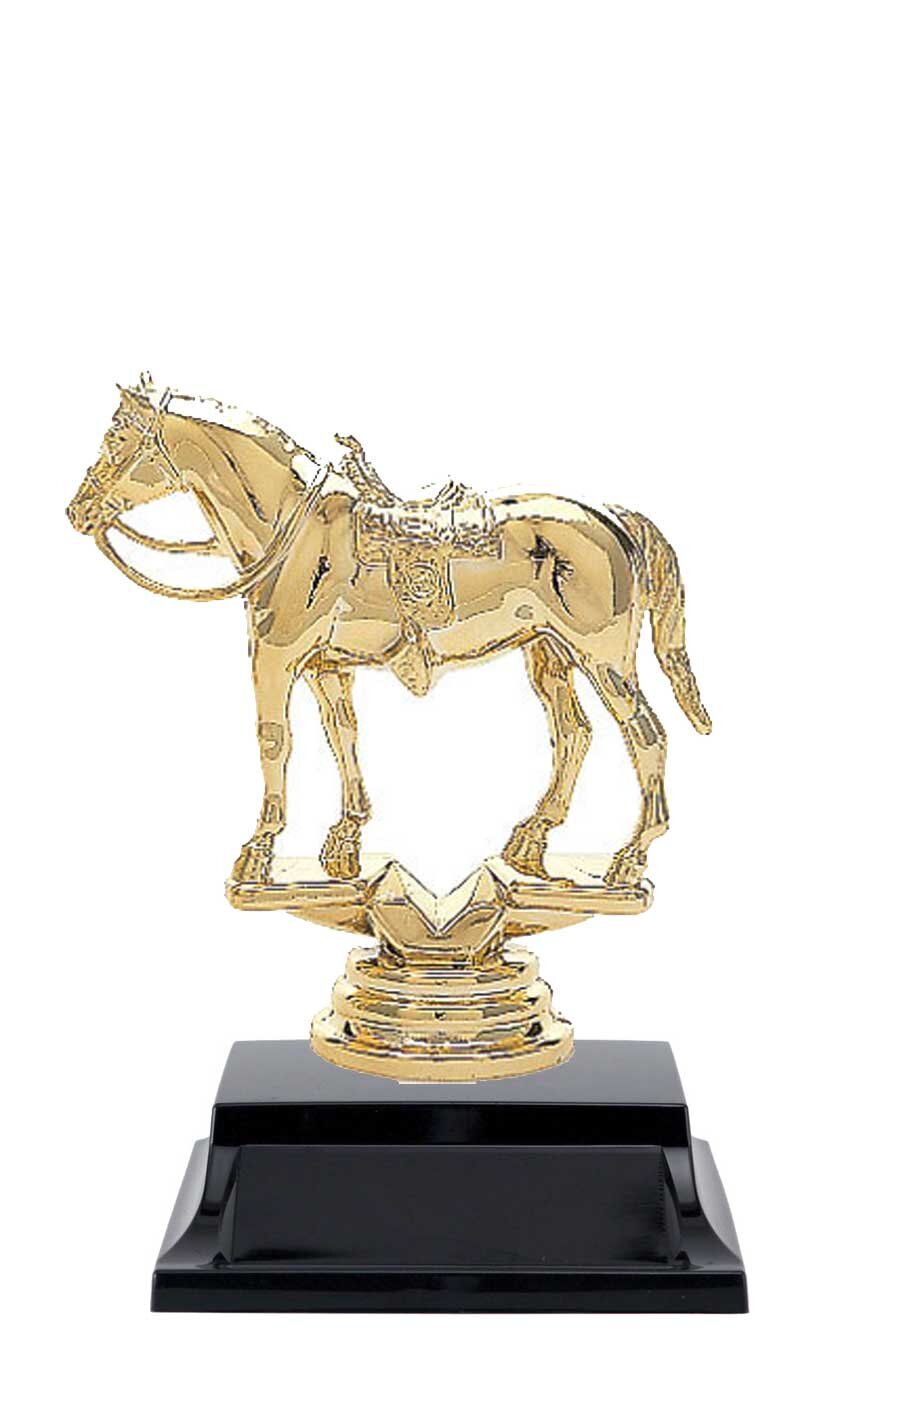 Glenway Cosmos Mini Horse & Horse Shoe Award Trophy with FREE engraving